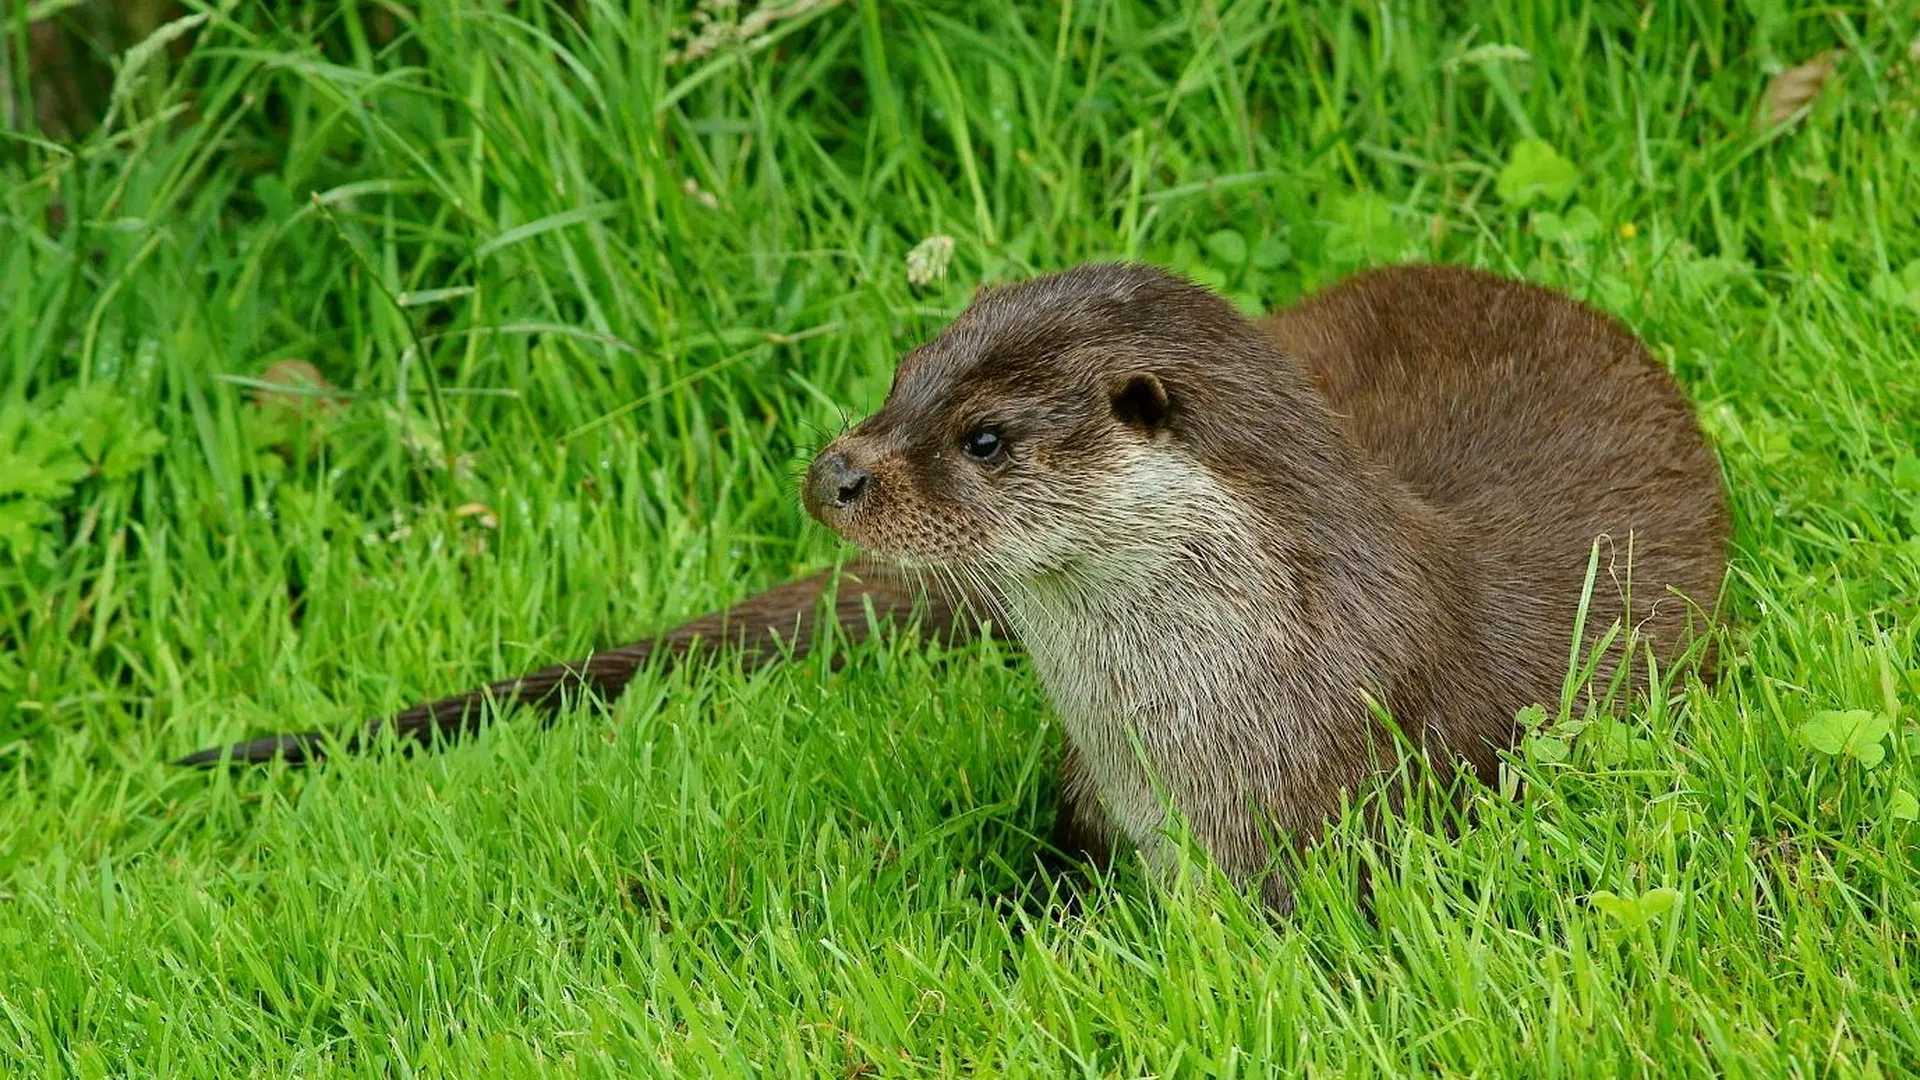 Peter Trimming from Croydon, England. Young Otter (1), CC BY 2.0